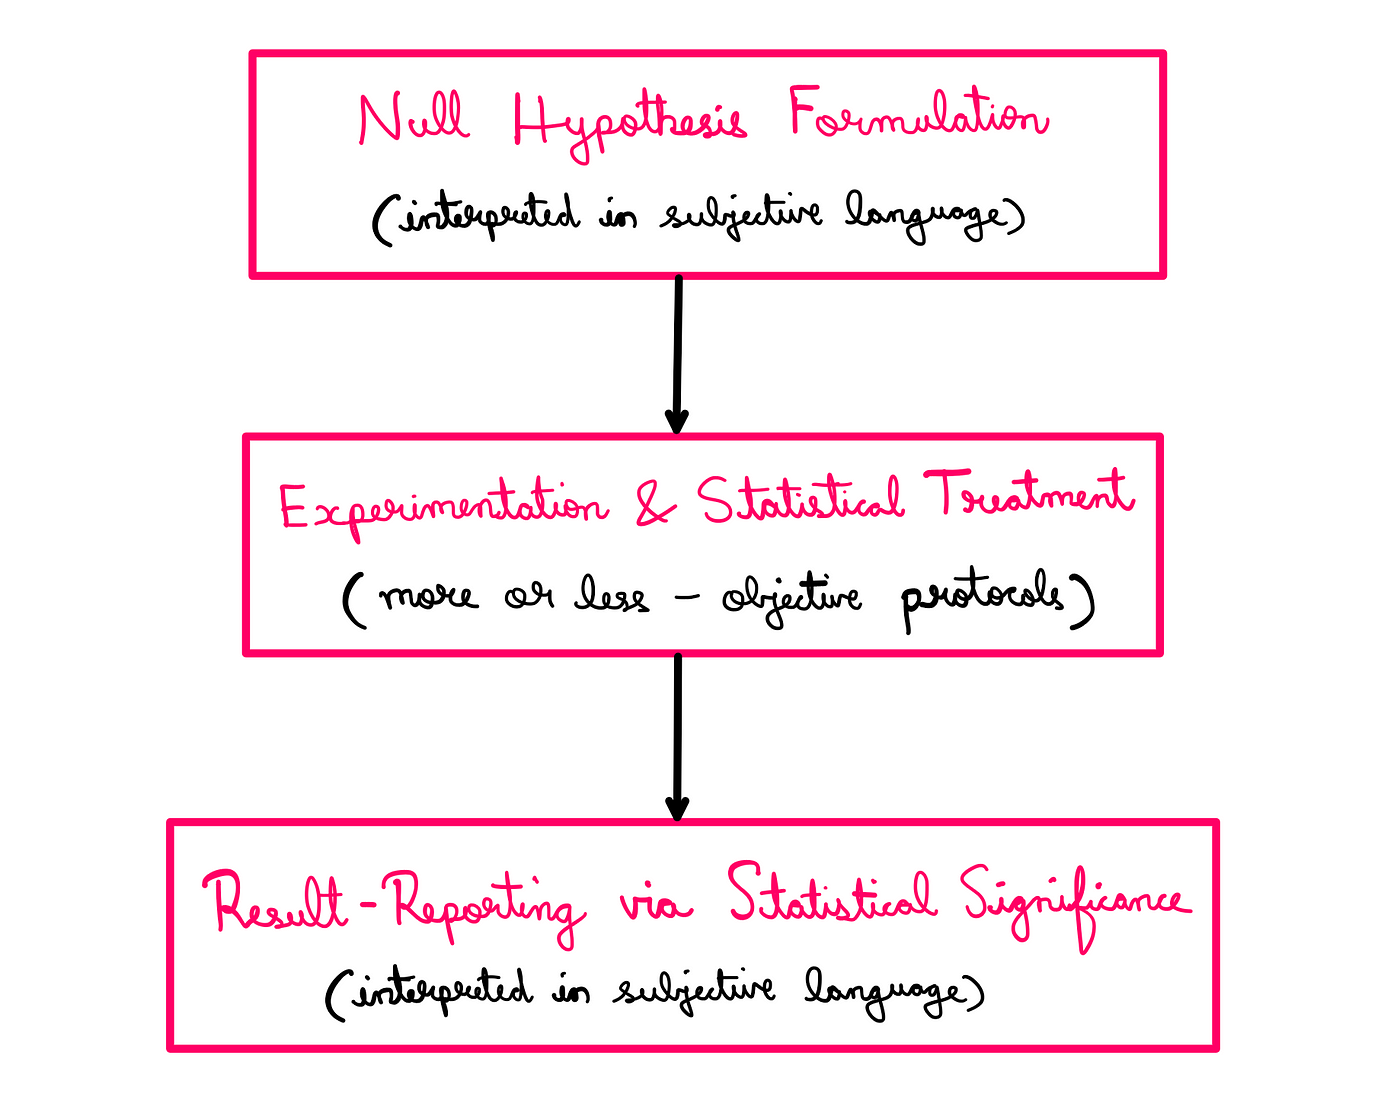 How To Really Understand Statistical Significance? — a flowchart showing the following text flow: Null hypothesis formulation (interpreted in subjective language) → Experimentation and statistical treatment (more or less — objective protocols) → Result-reporting via statistical significance (interpreted in subjective language).